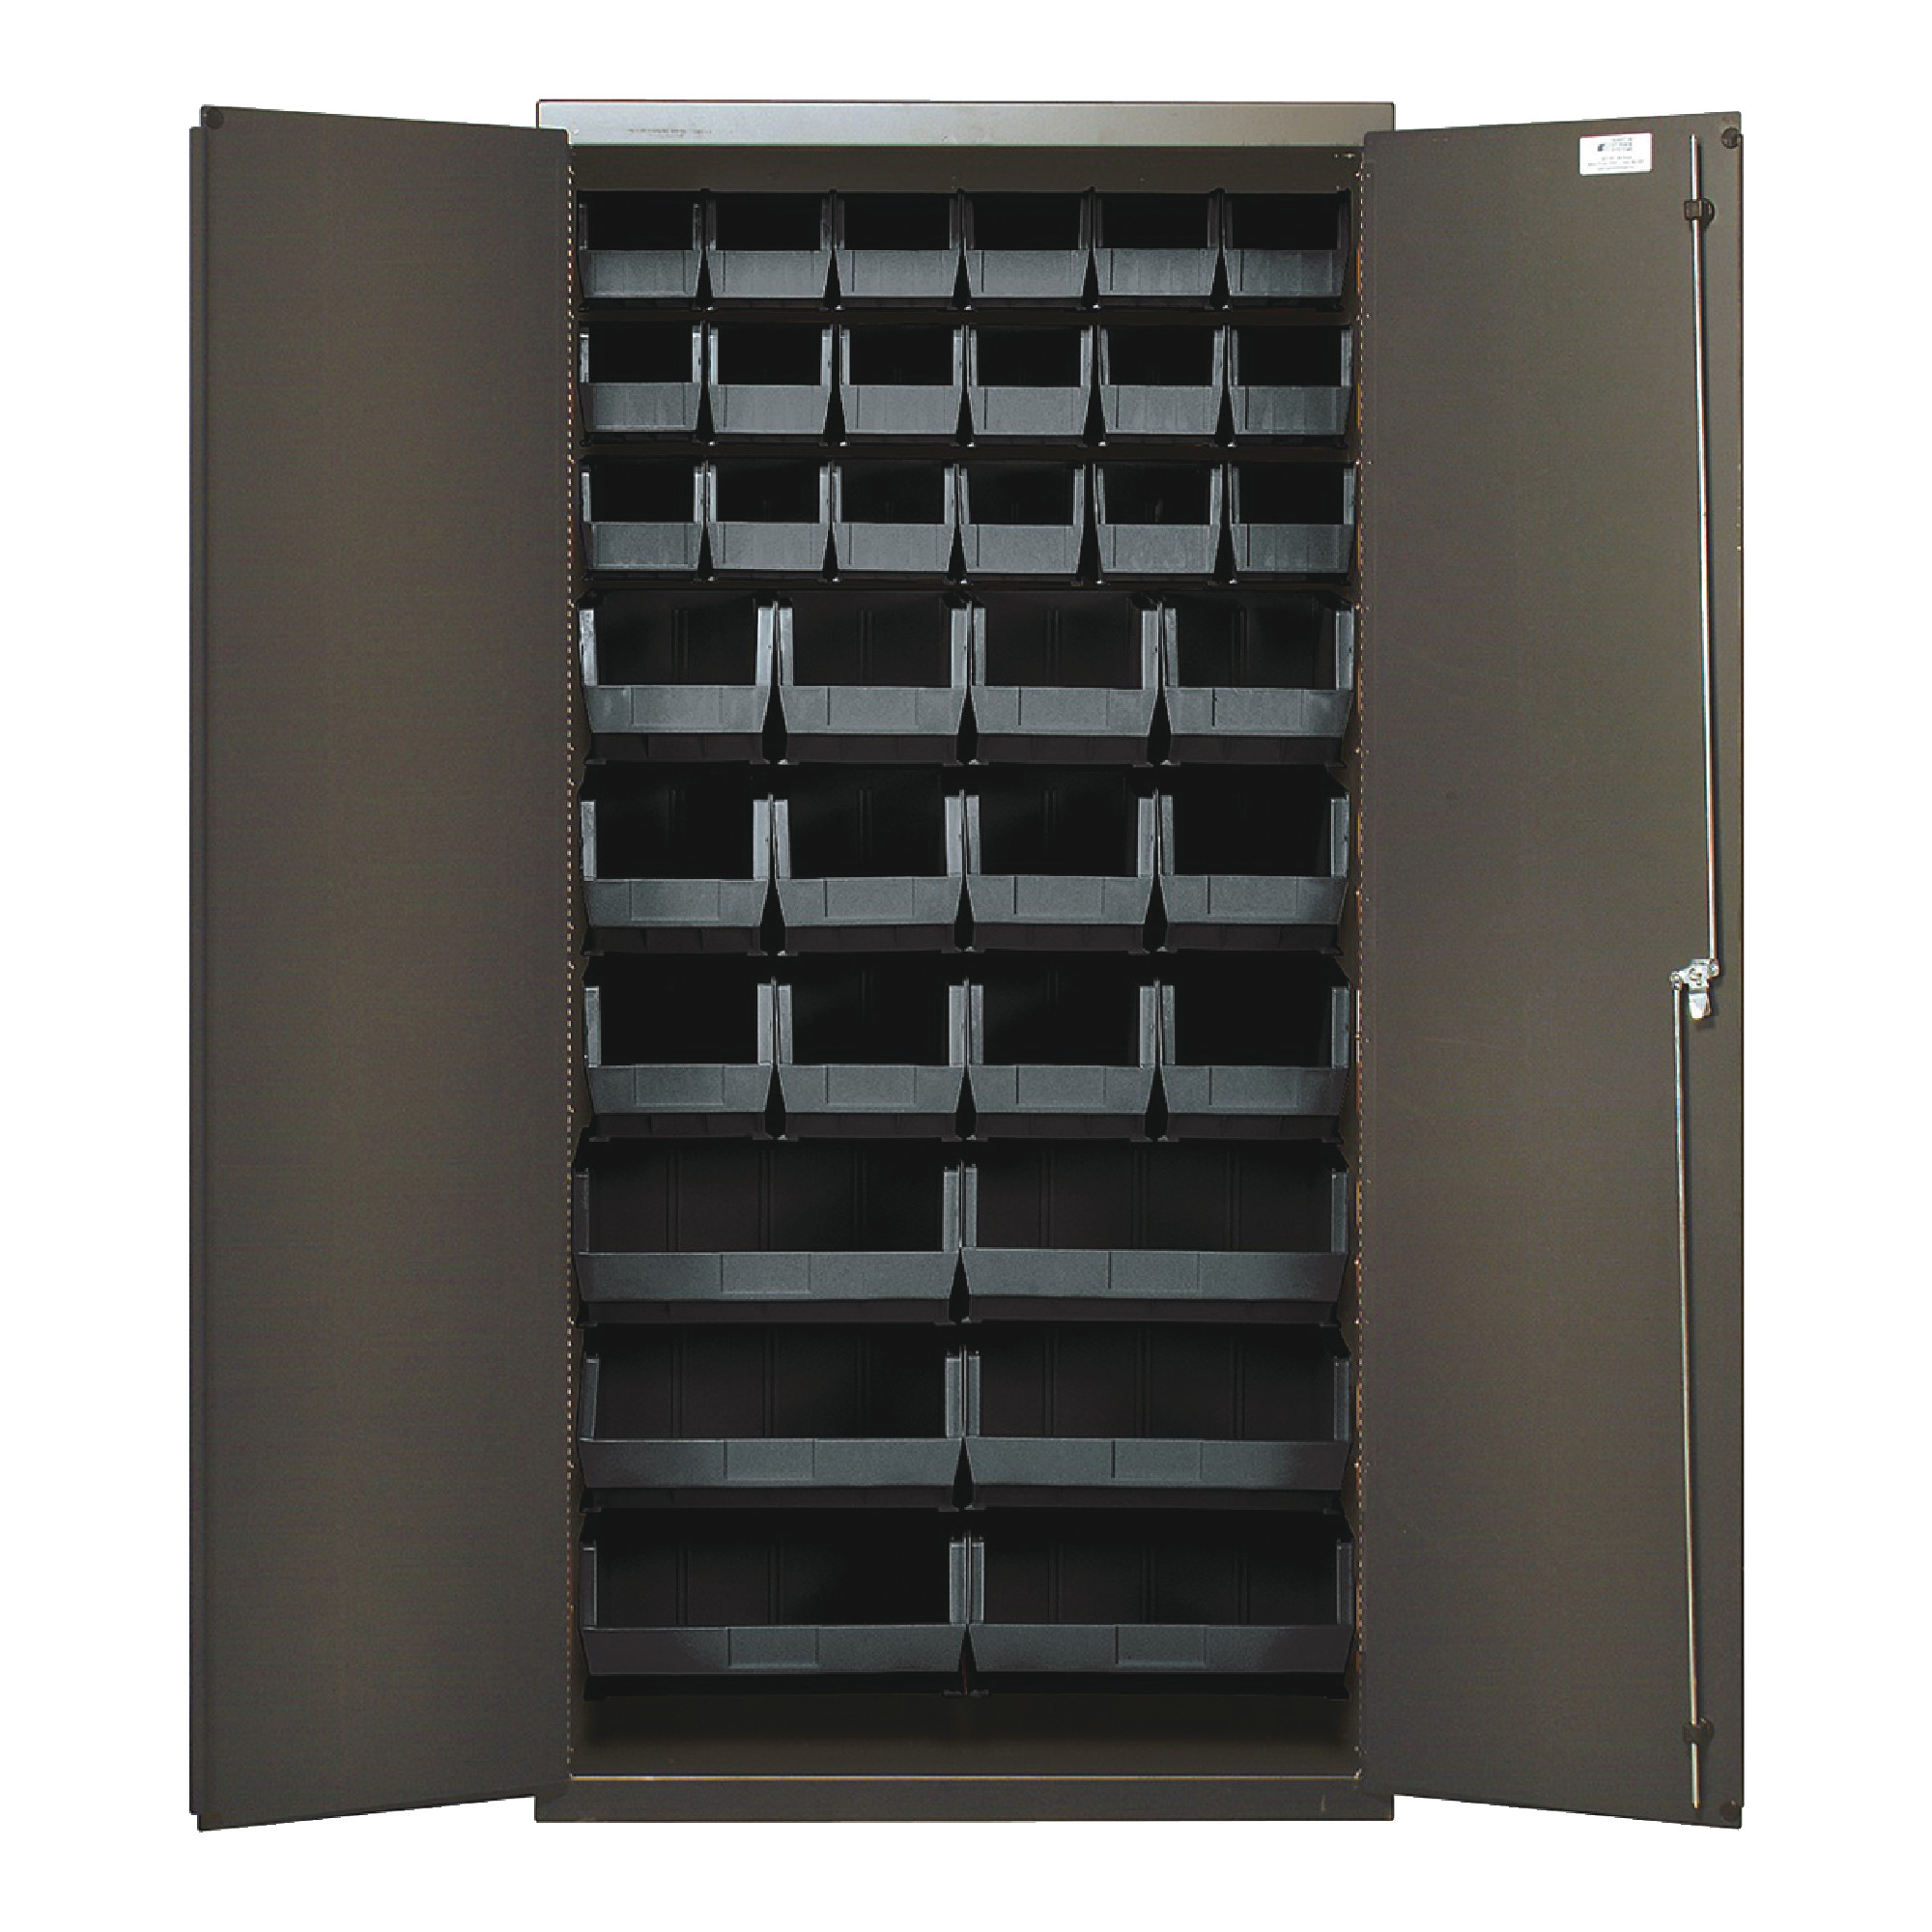 QUANTUM STORAGE SYSTEMS 36" Wide All Welded Floor Cabinet With 36 Black Bins